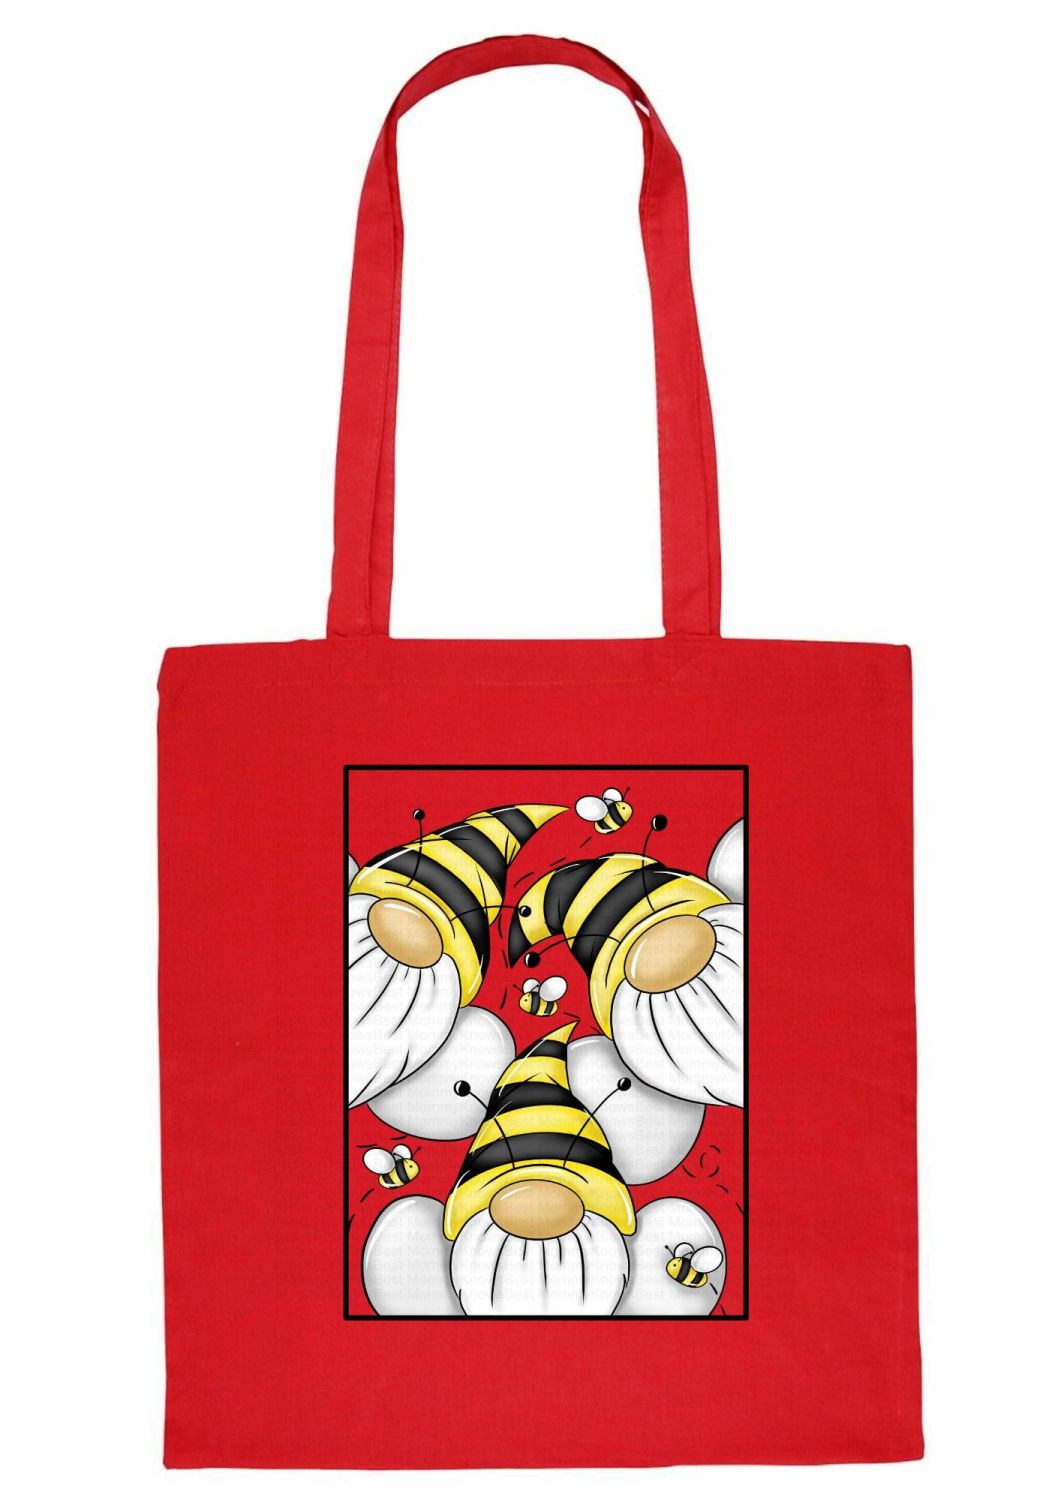 Red bee gonks tote bag - bag for life - 100% cotton